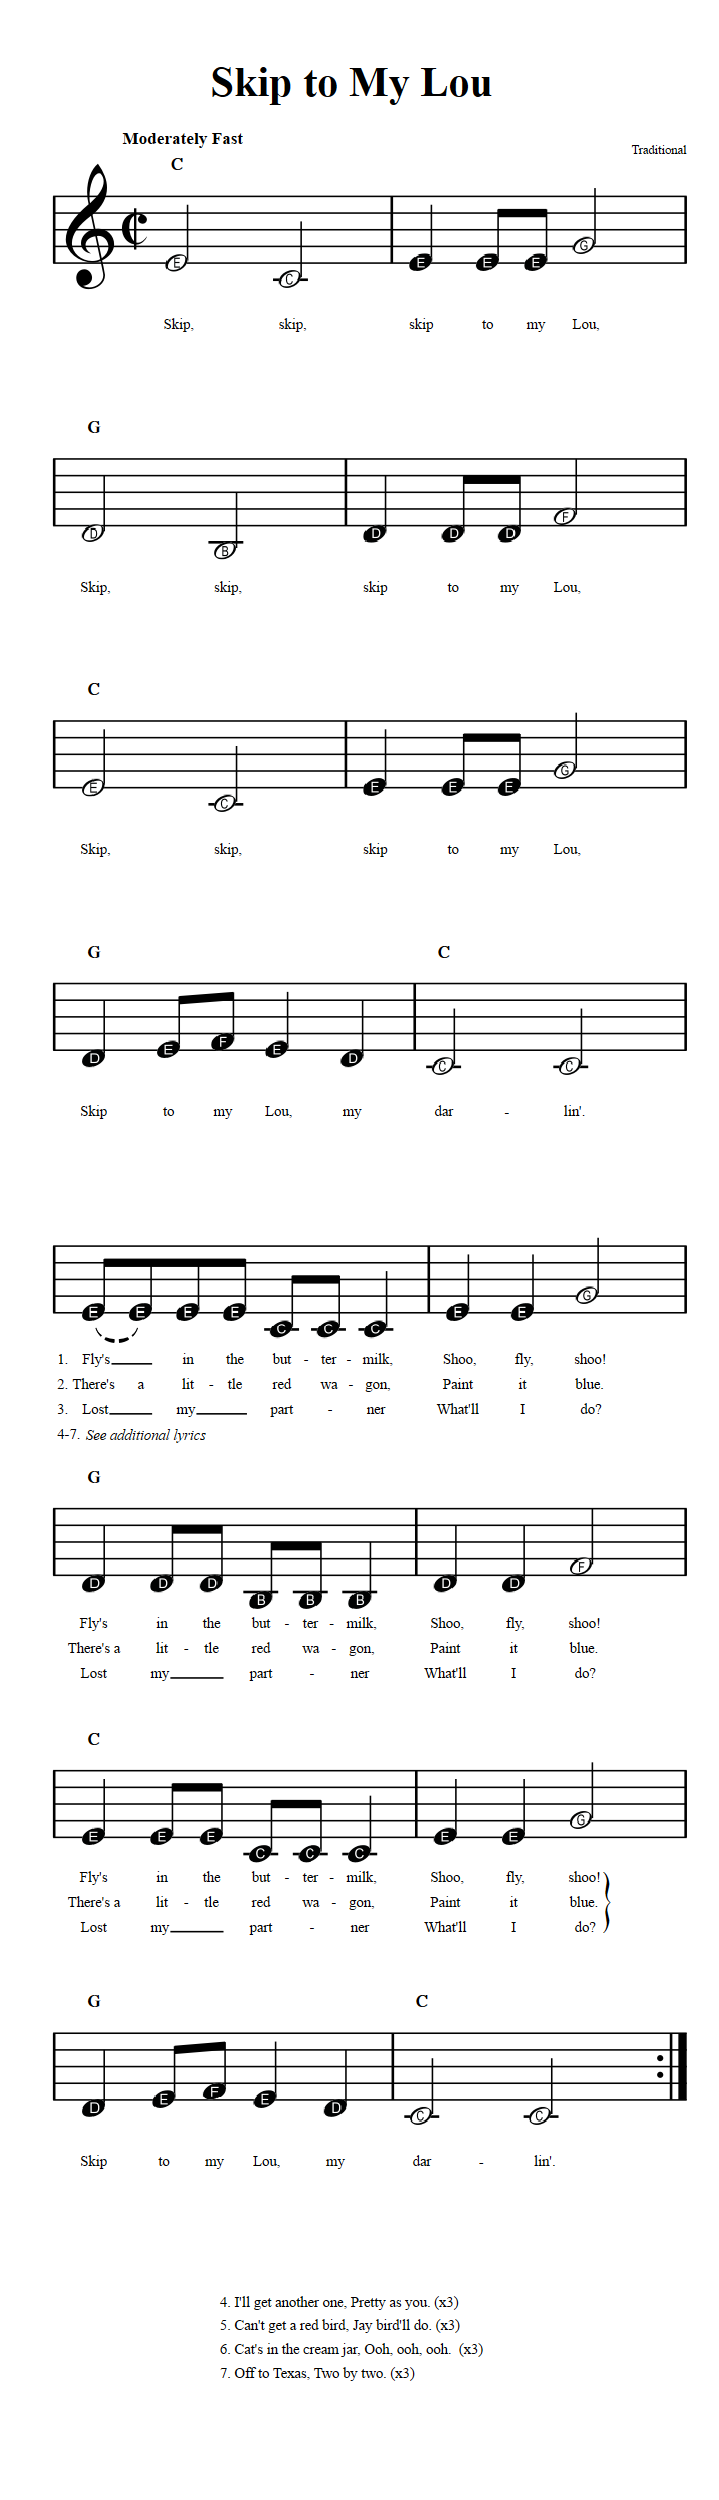 skip-to-my-lou-beginner-sheet-music-with-chords-and-lyrics